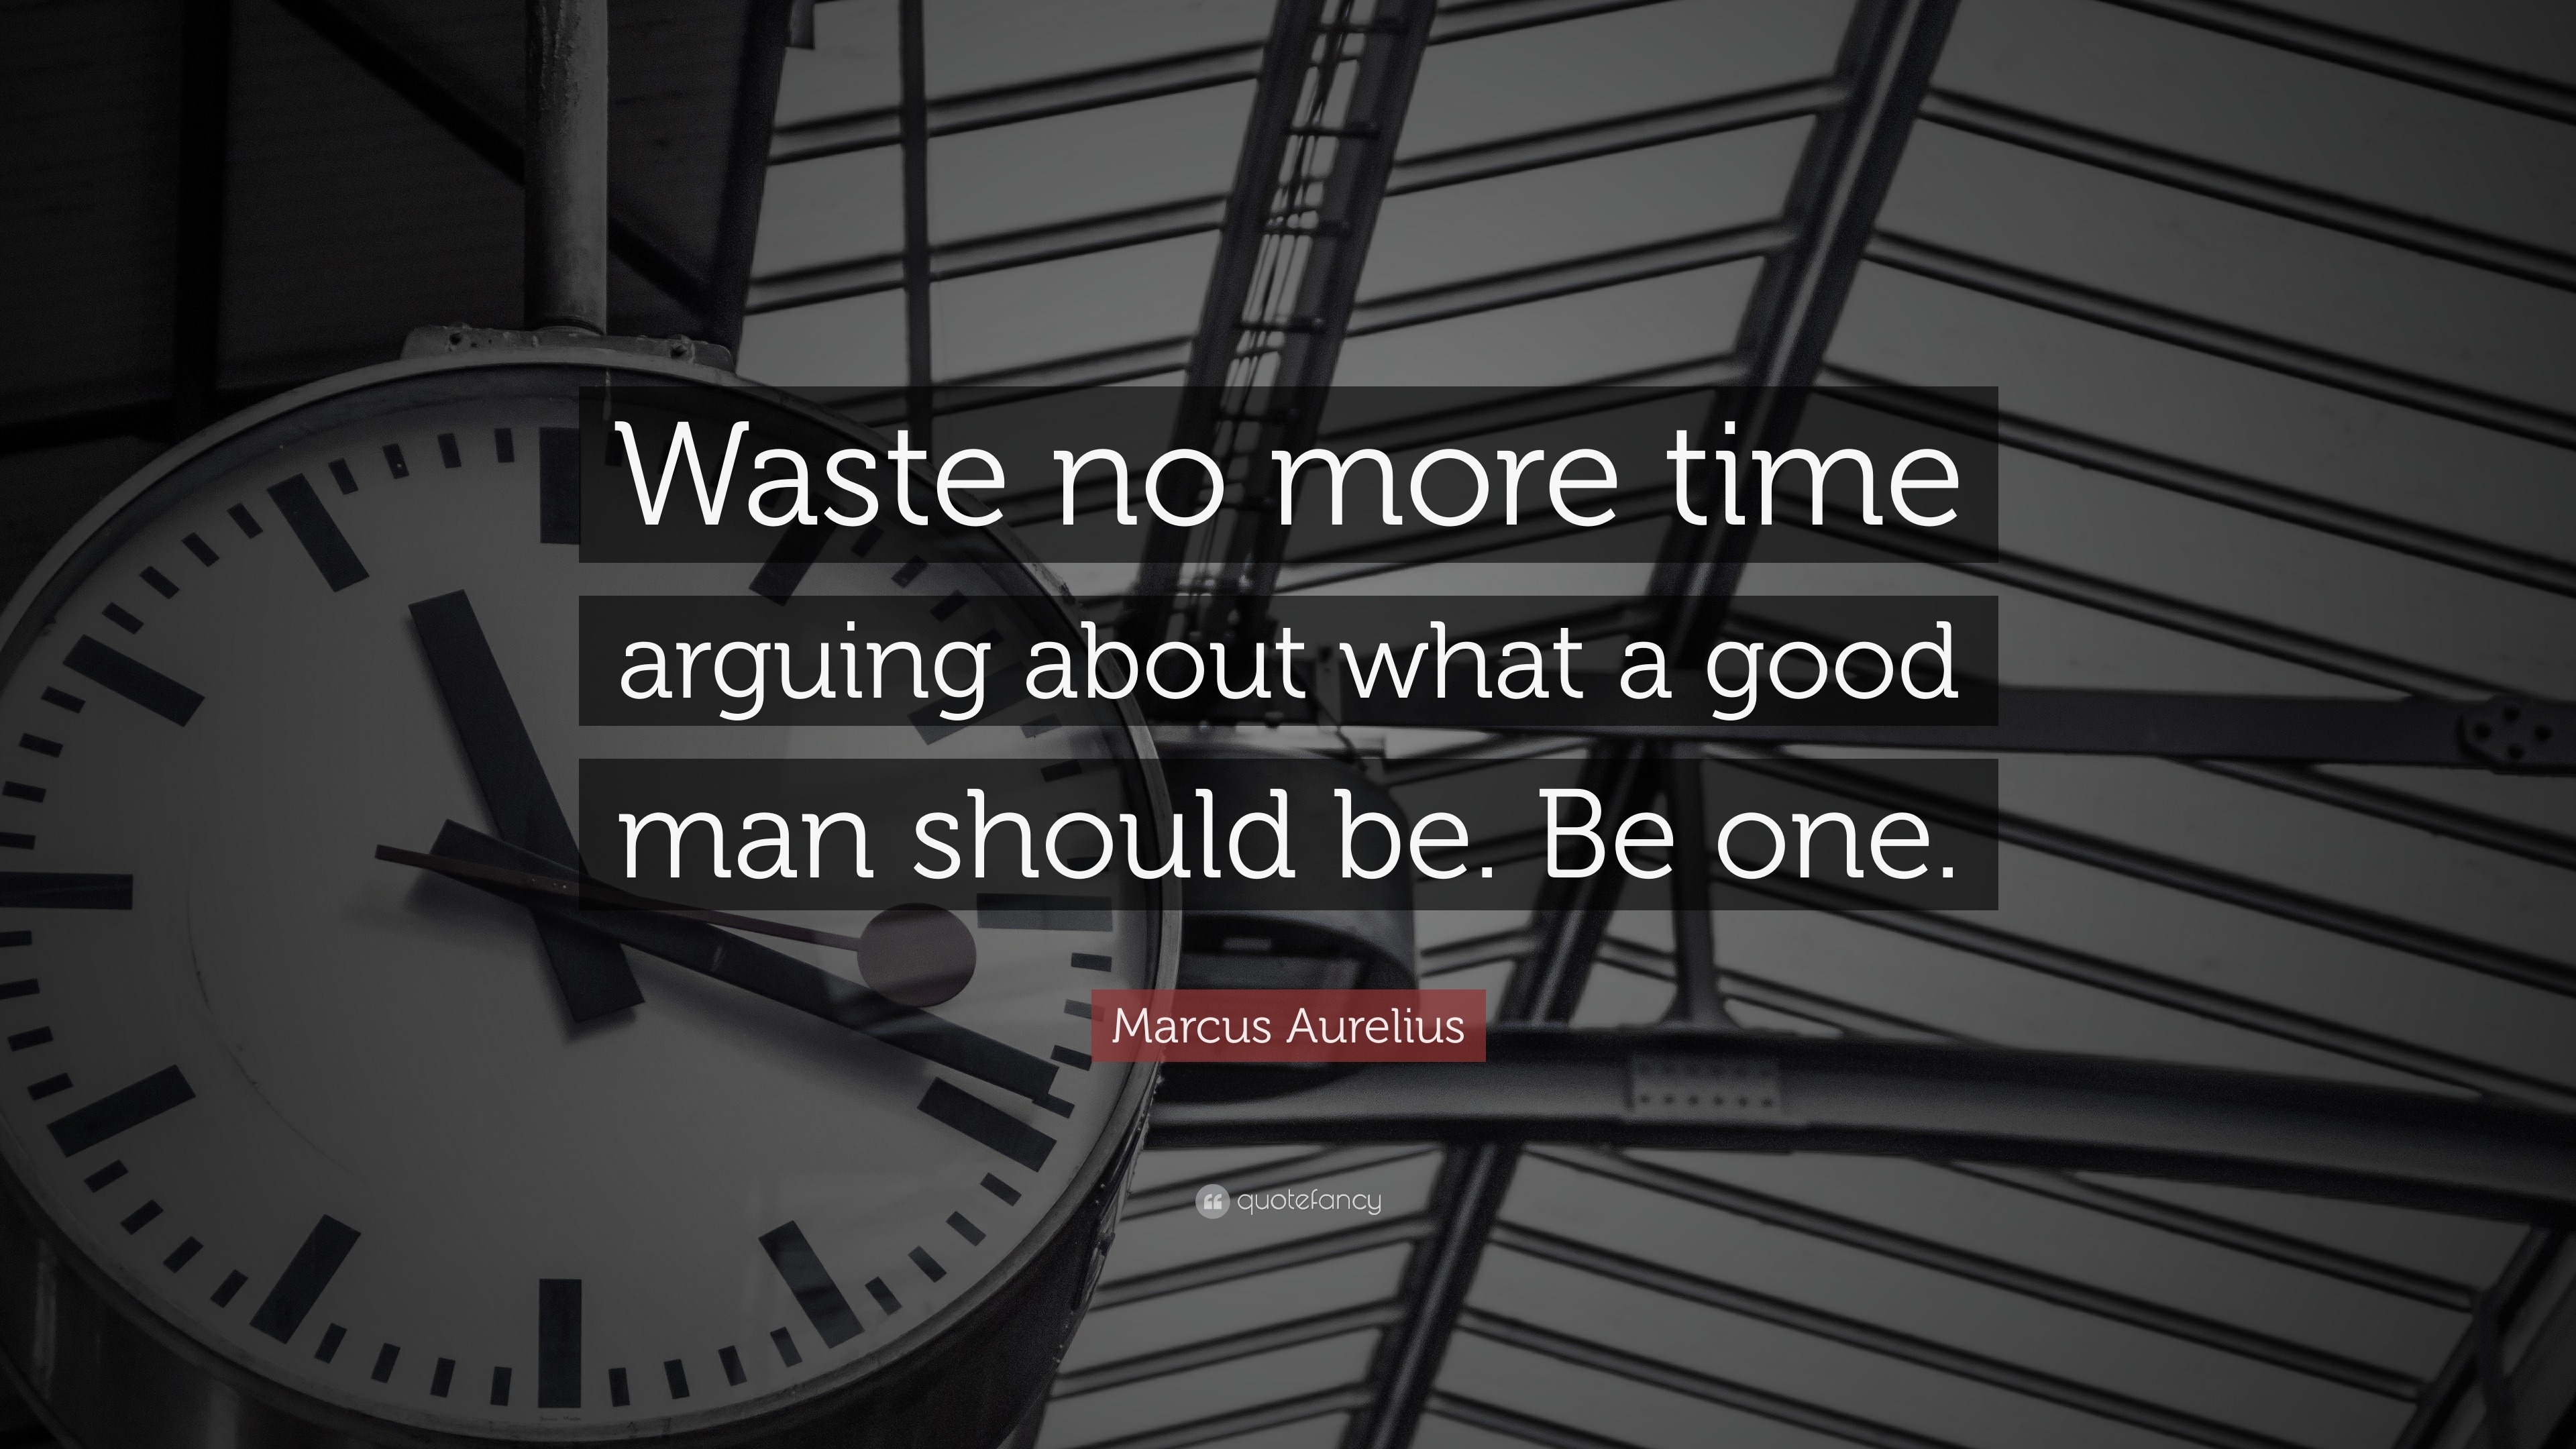 Marcus Aurelius Quote “Waste no more time arguing about what a good man should